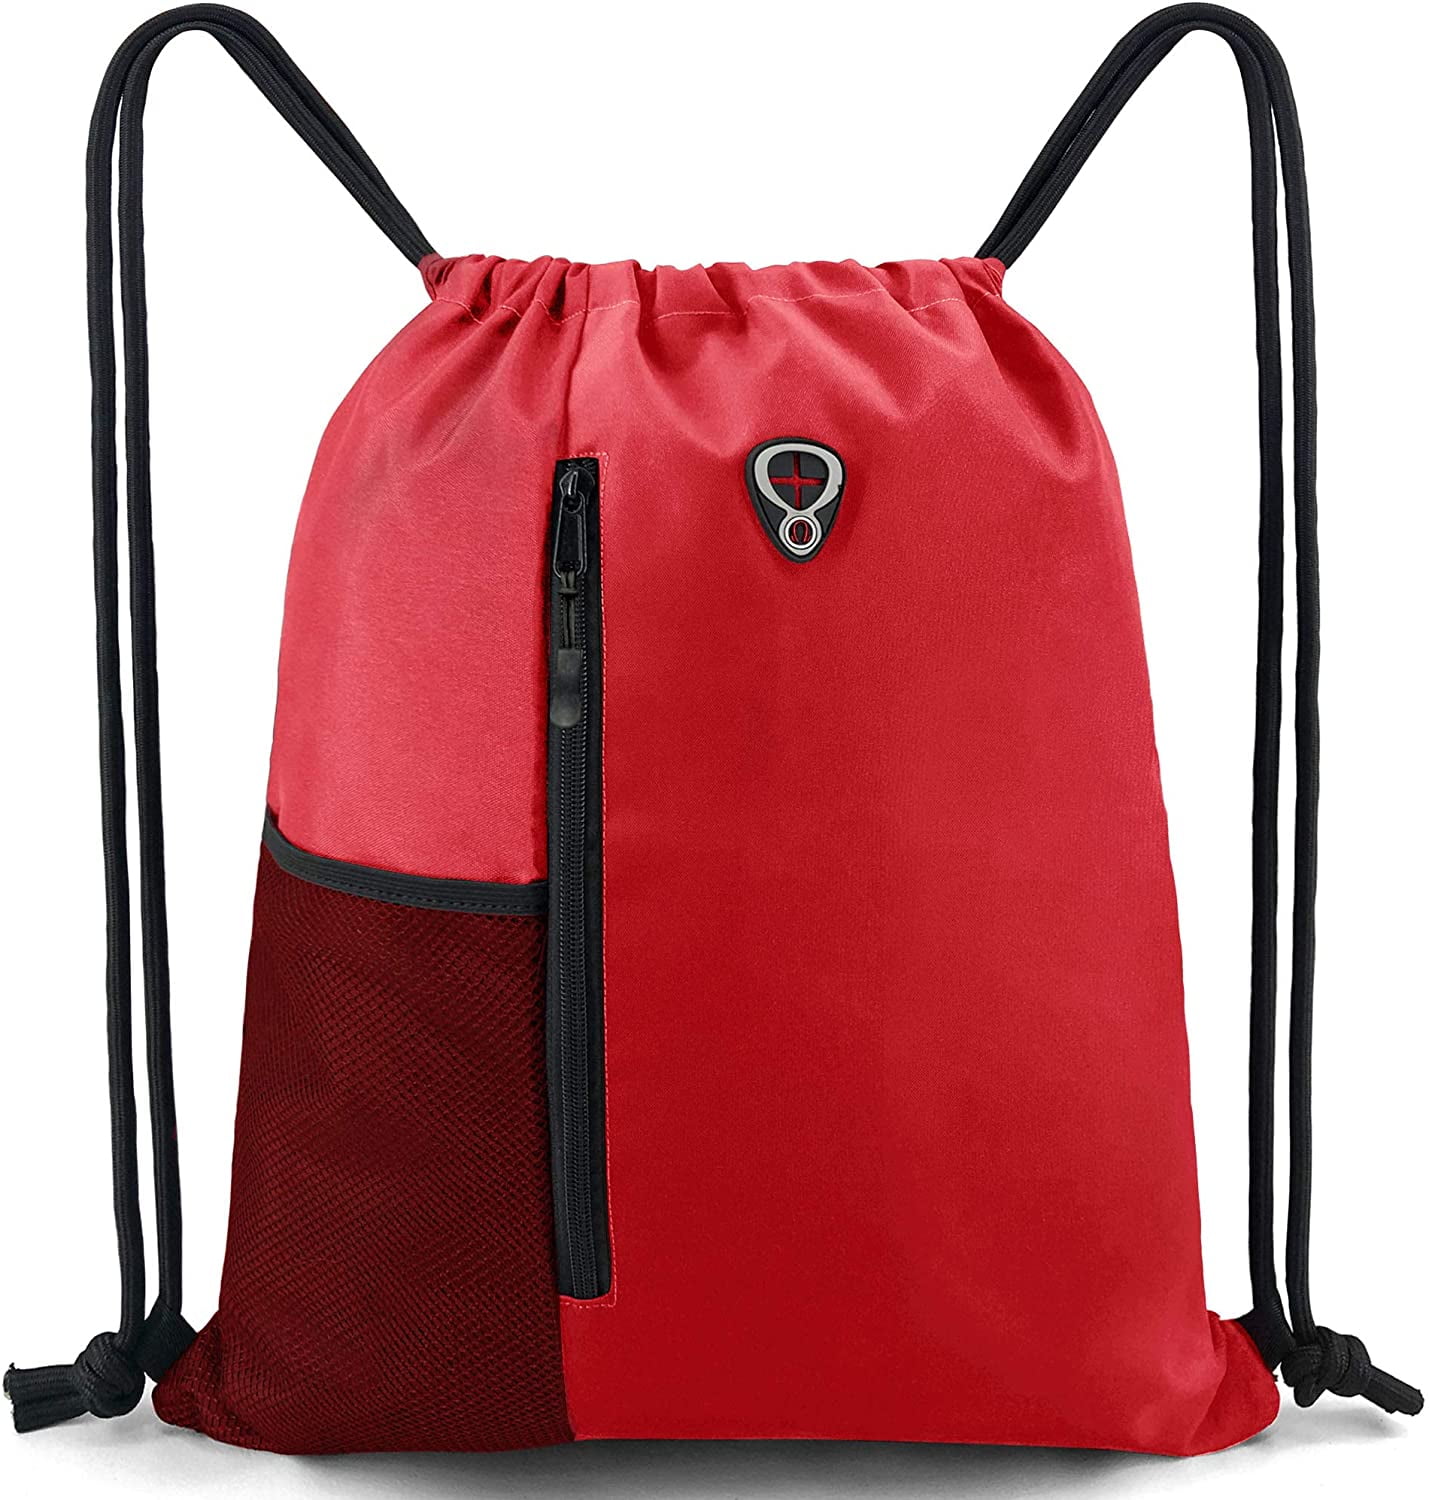 Drawstring Backpack Sports Gym Bag for Women Men Children Large Size with Zipper and Water Bottle Mesh Pockets 